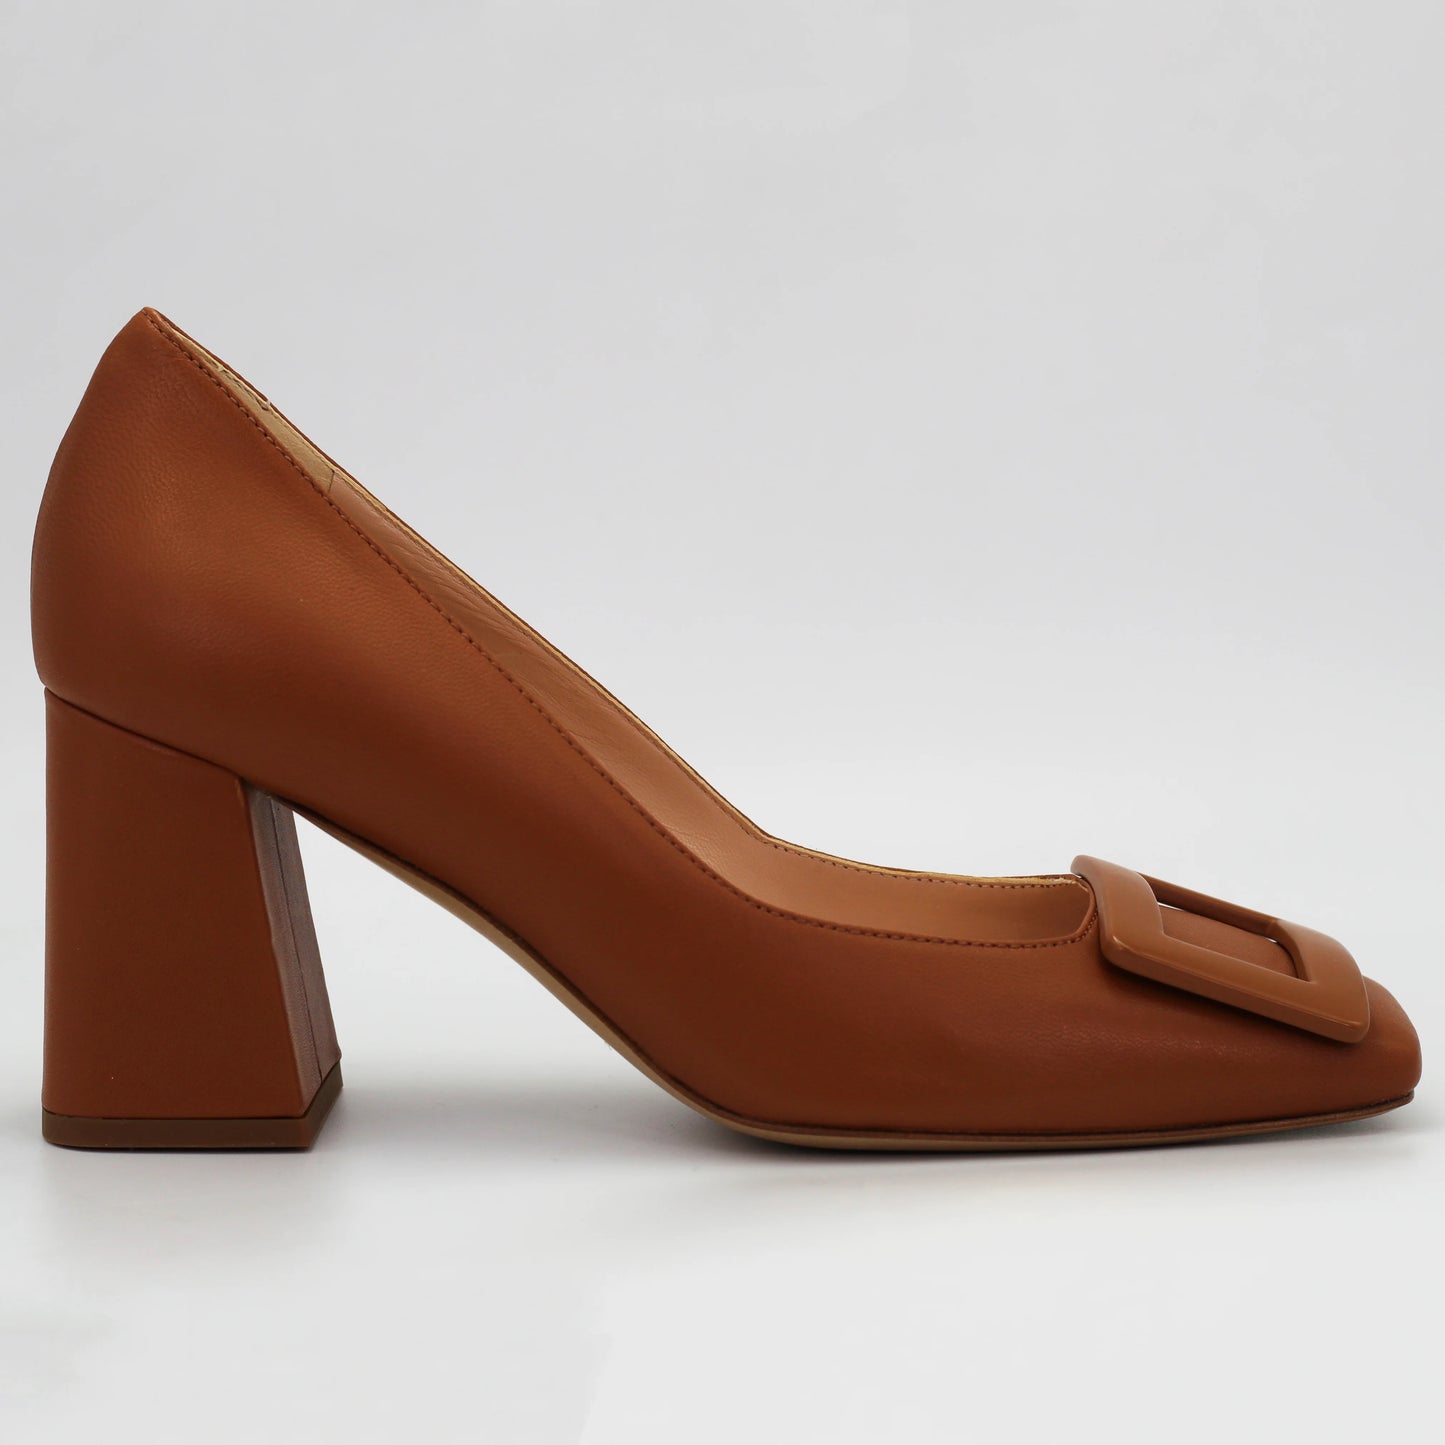 Shop Handmade Italian Leather block heel in Cuoio (MP1710) or browse our range of hand-made Italian shoes in leather or suede in-store at Aliverti Cape Town, or shop online. We deliver in South Africa & offer multiple payment plans as well as accept multiple safe & secure payment methods.